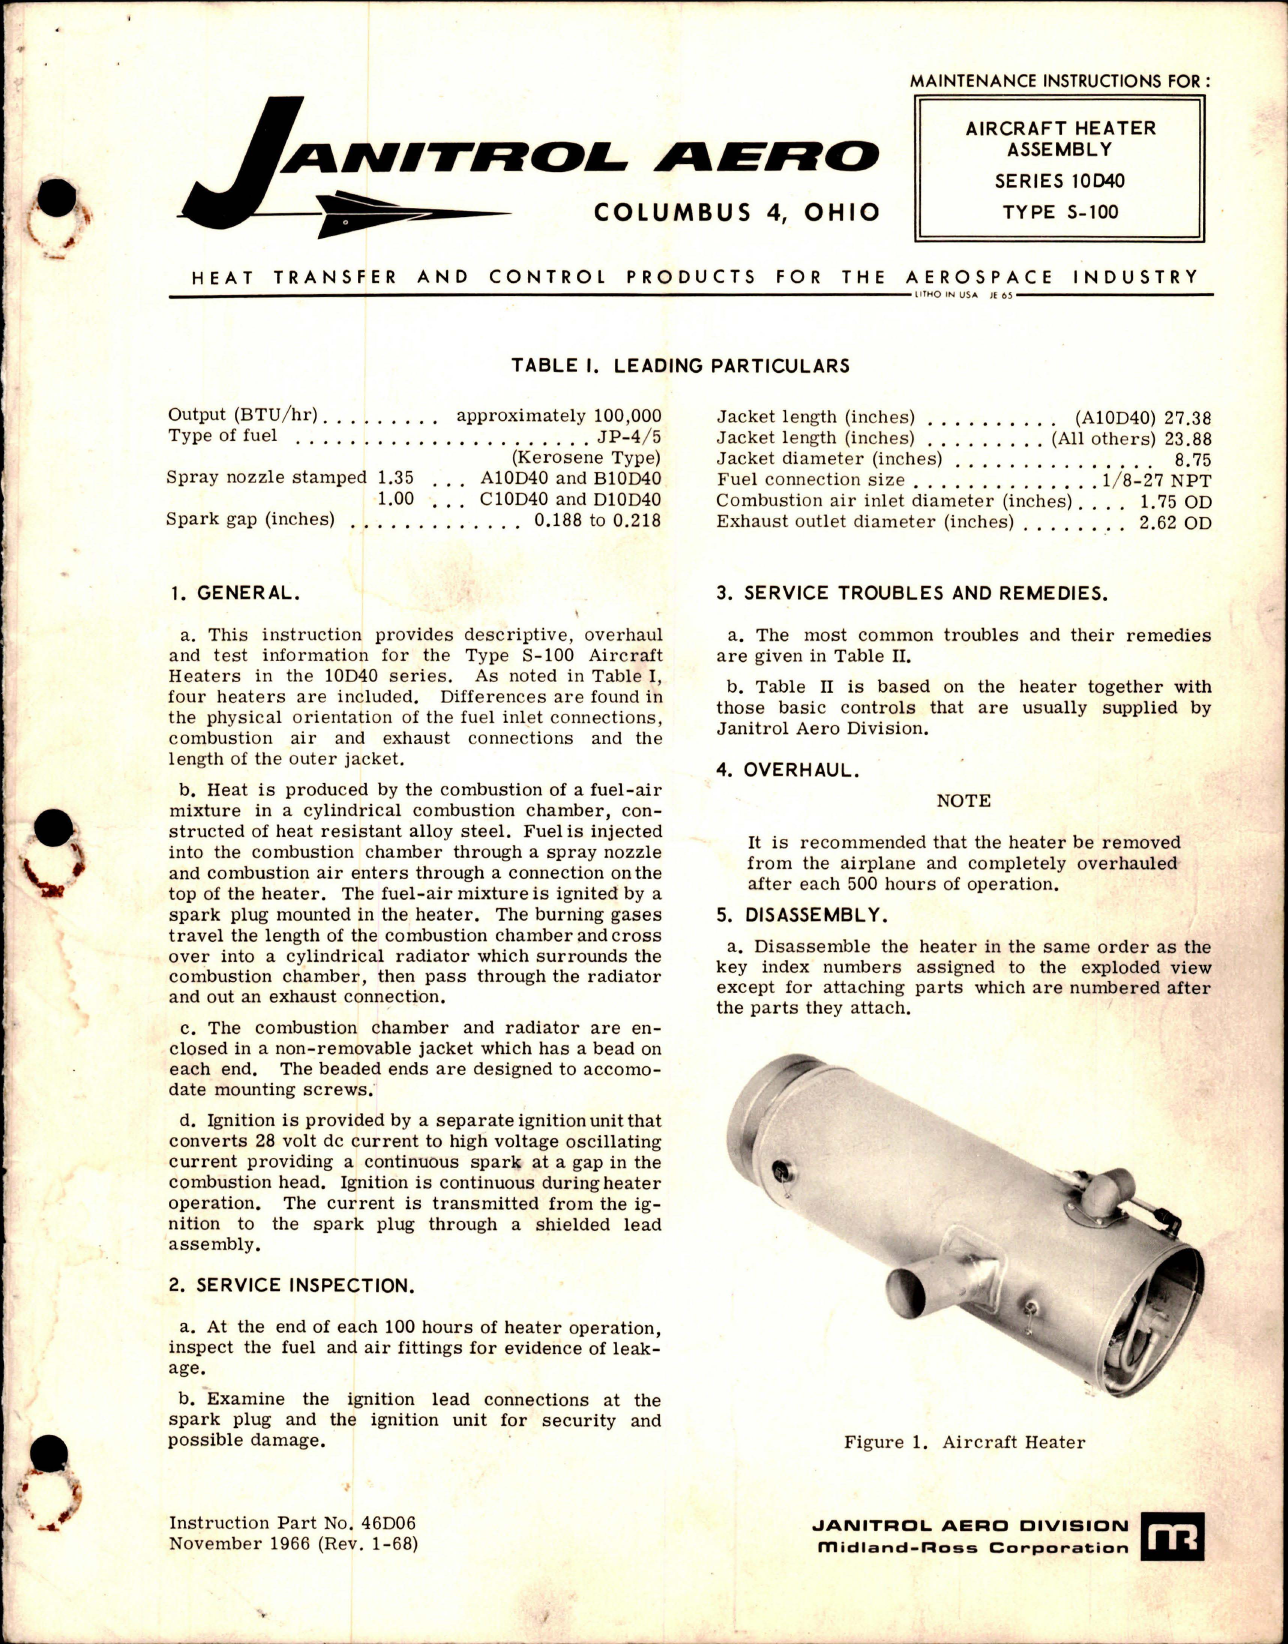 Sample page 1 from AirCorps Library document: Maintenance Instructions for Aircraft Heater Assembly - Series 10D40, Type S-100 